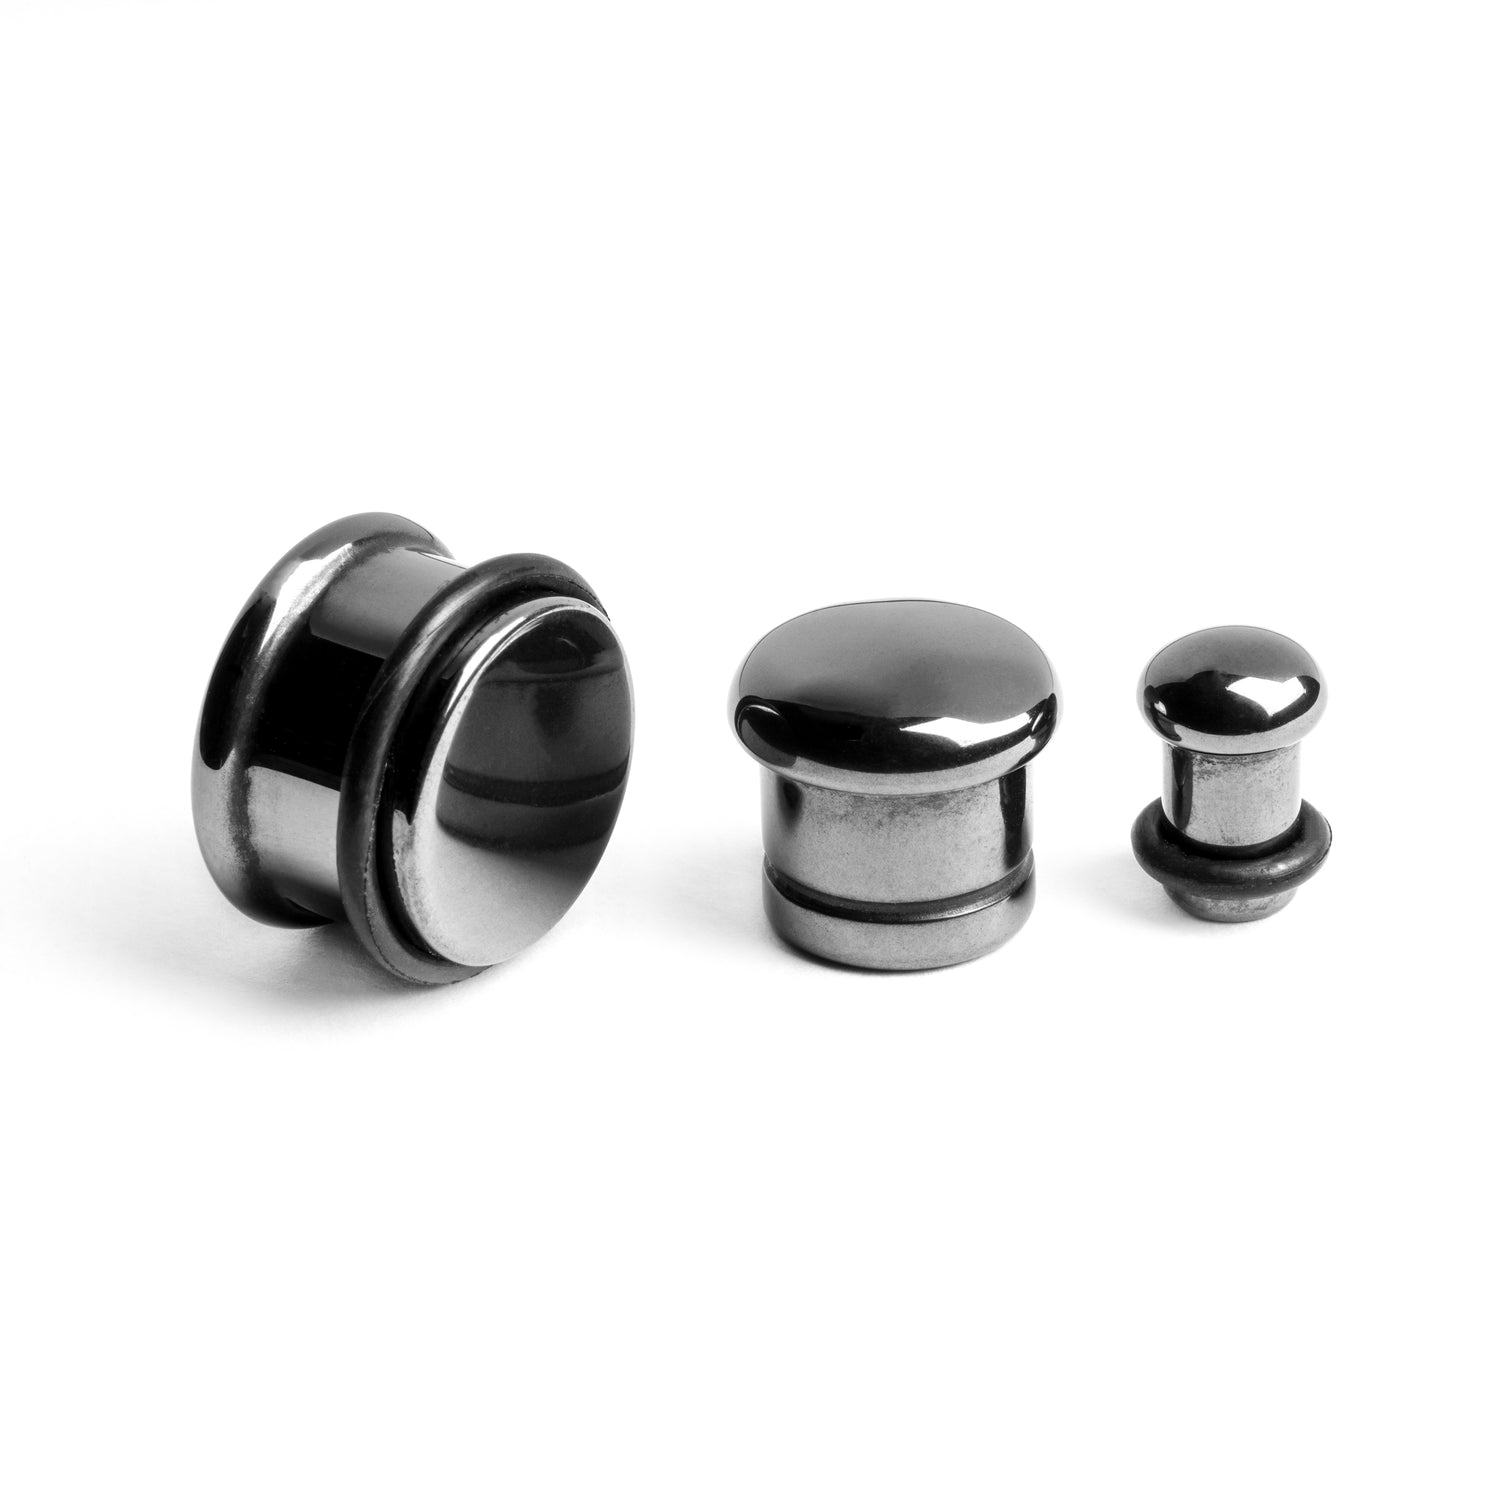 several sizes of Single Flared Hematite Stone Plugs front side and back view